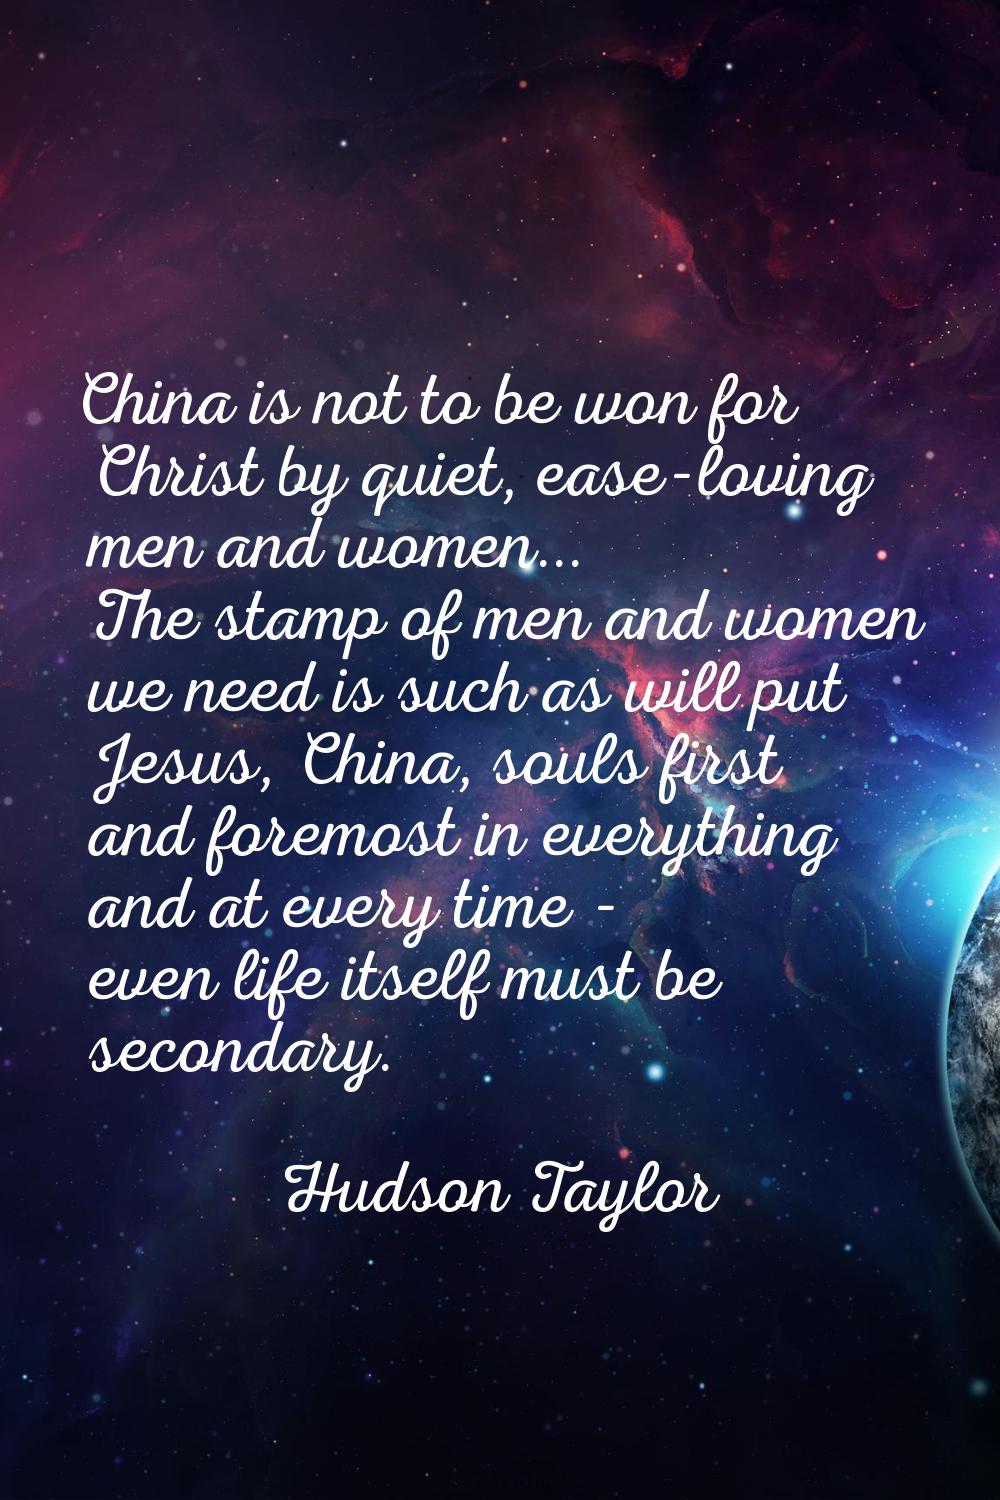 China is not to be won for Christ by quiet, ease-loving men and women... The stamp of men and women